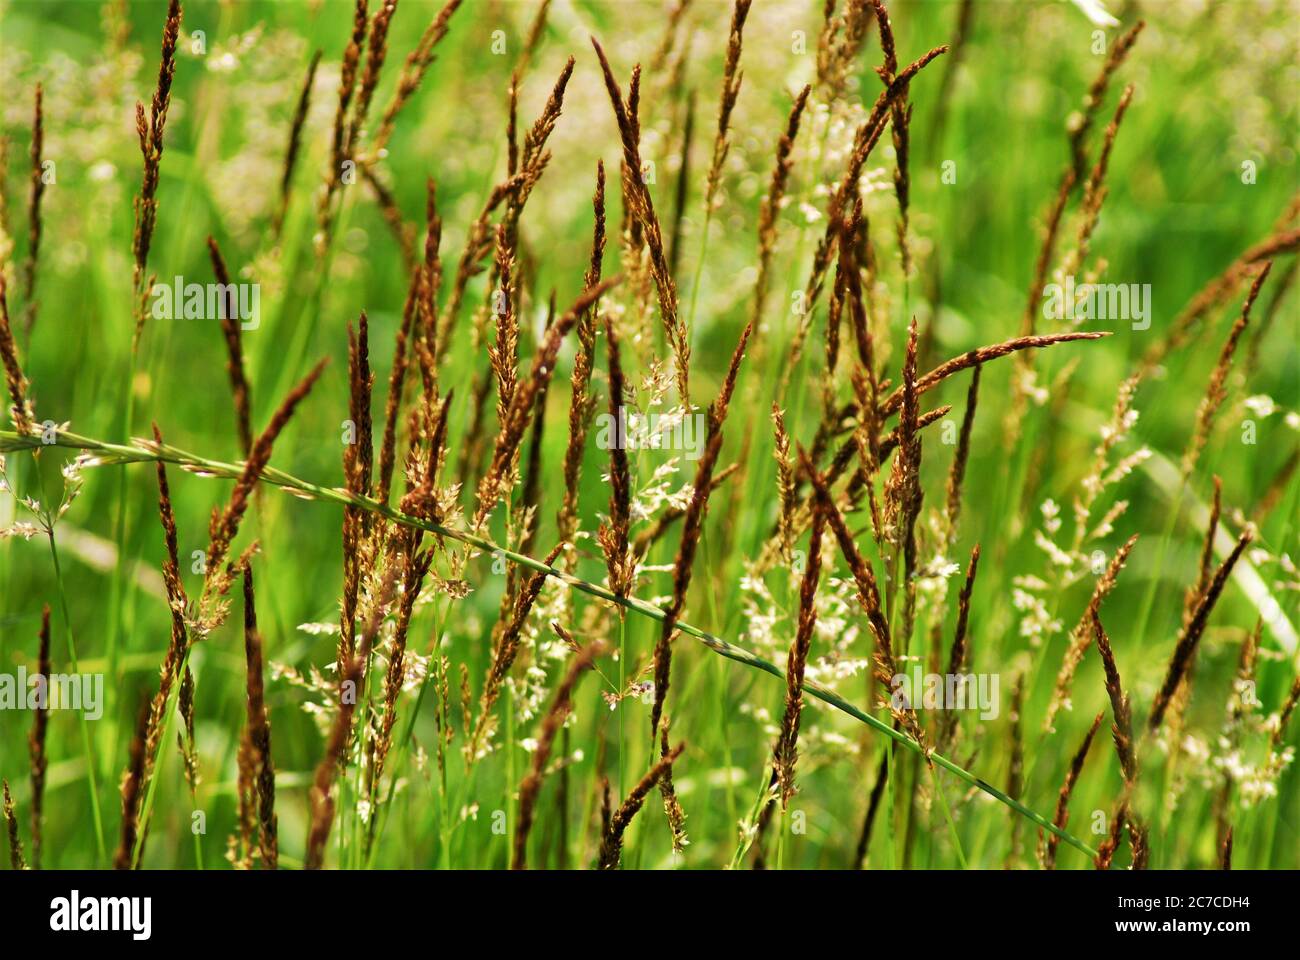 Brown tall grasses against a green background Stock Photo